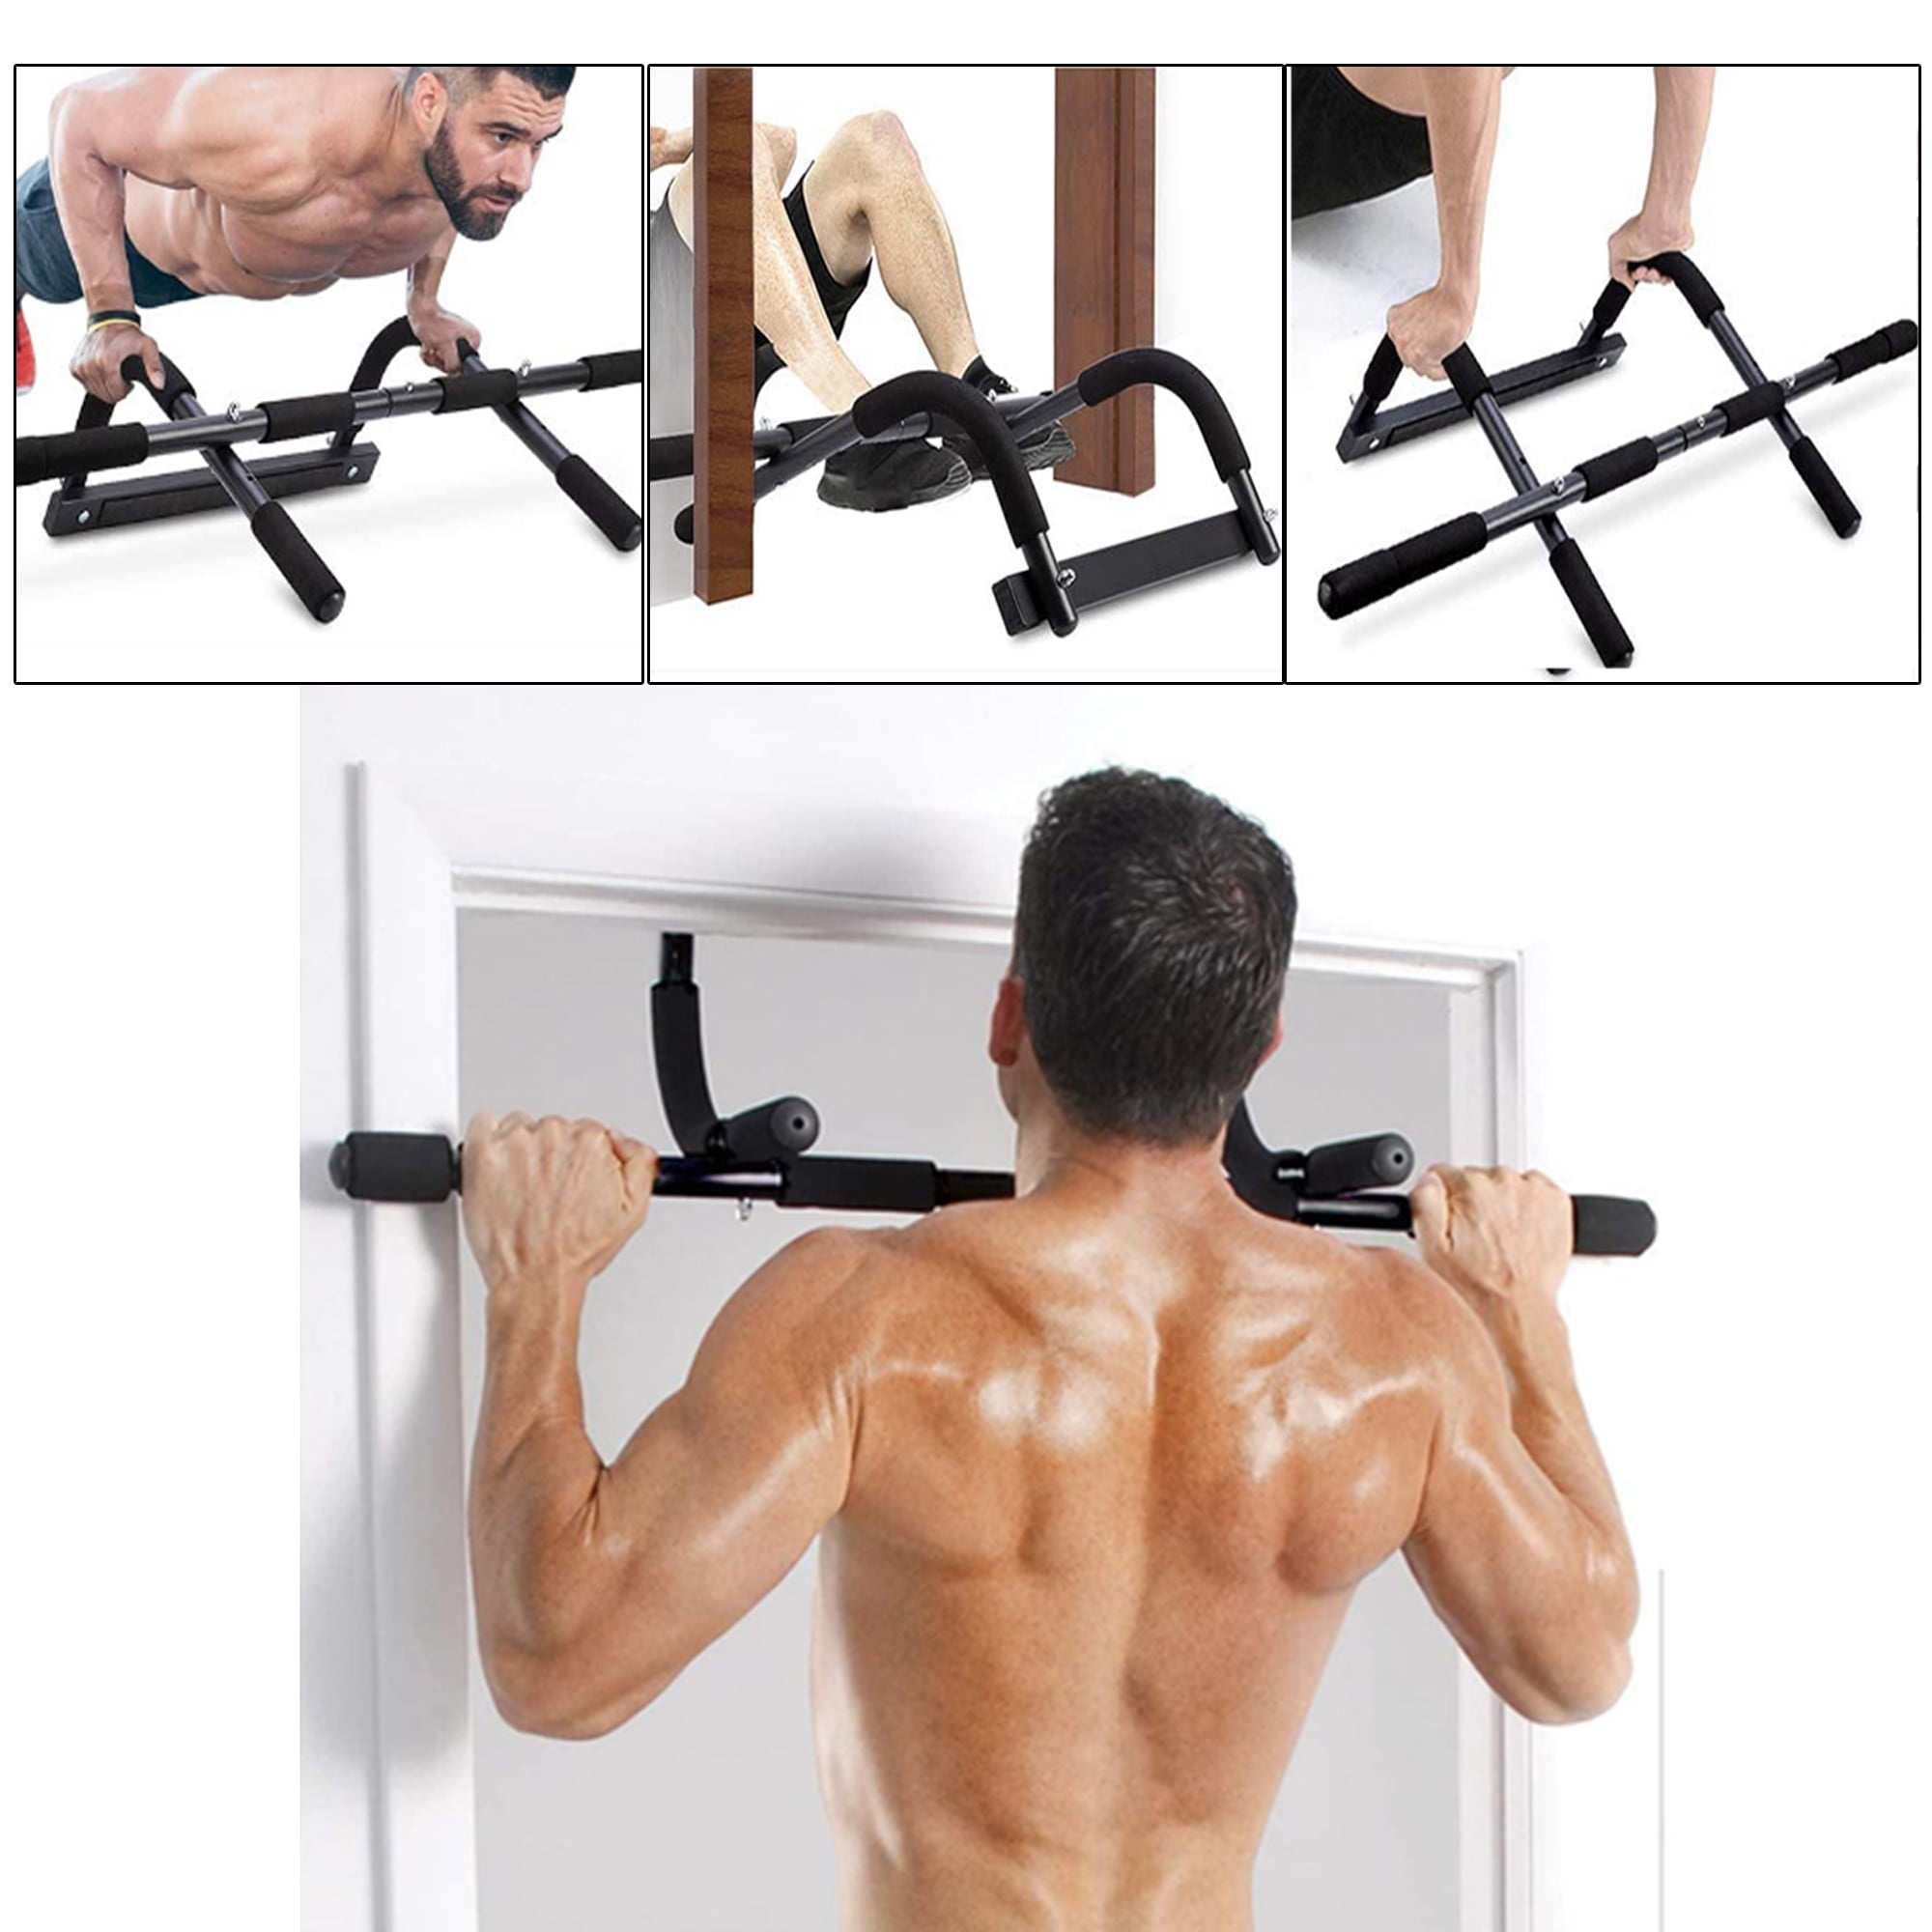 Pull up bar for Doorway Multifunctional Fitness Equipment on The Door Horizontal bar Indoor Home Pull-up Device and Portable Gym System